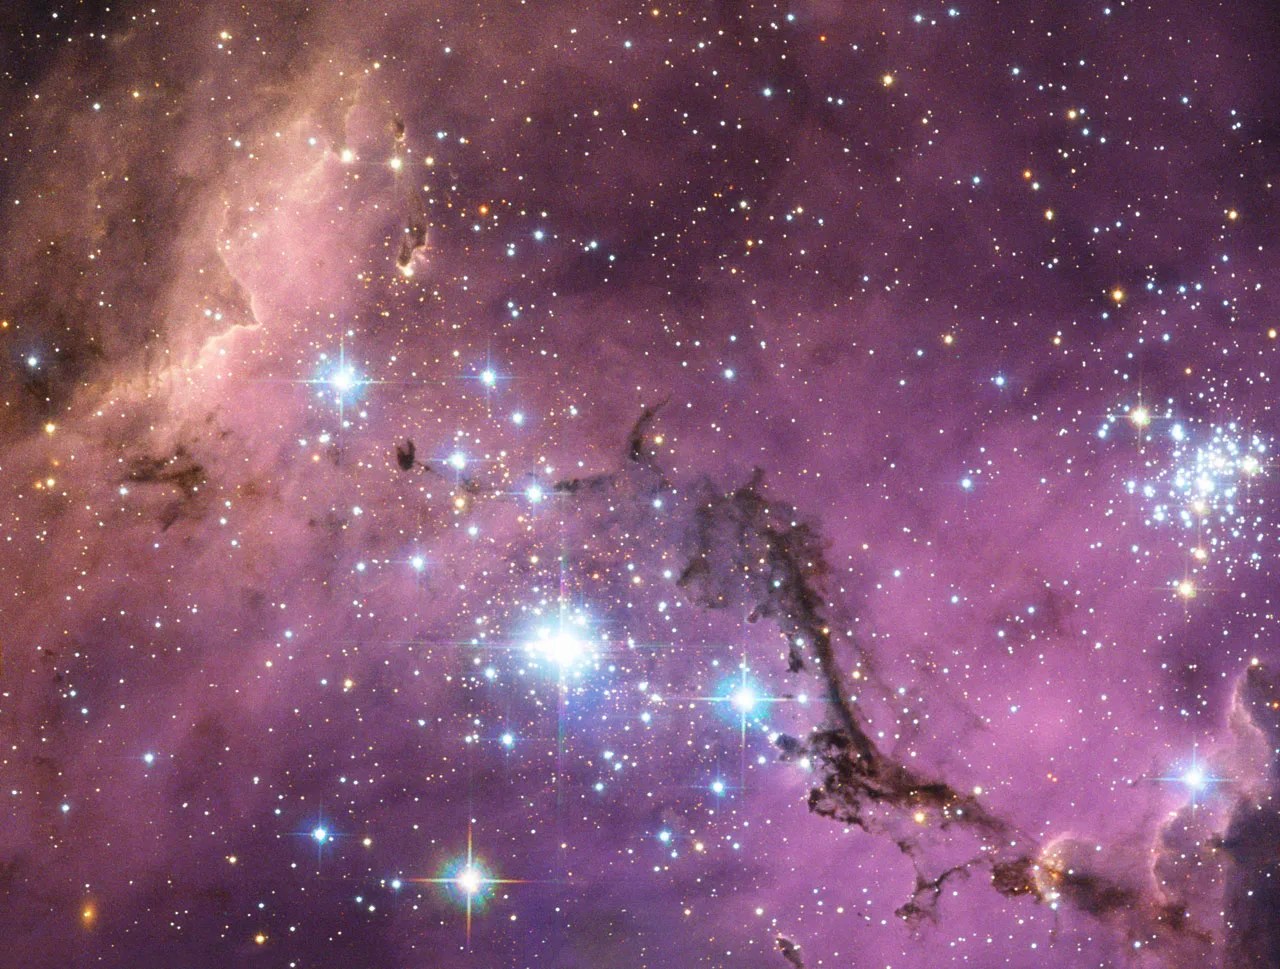 Hubble Finds Cosmic Bubbles and Filaments in Large Magellanic Cloud